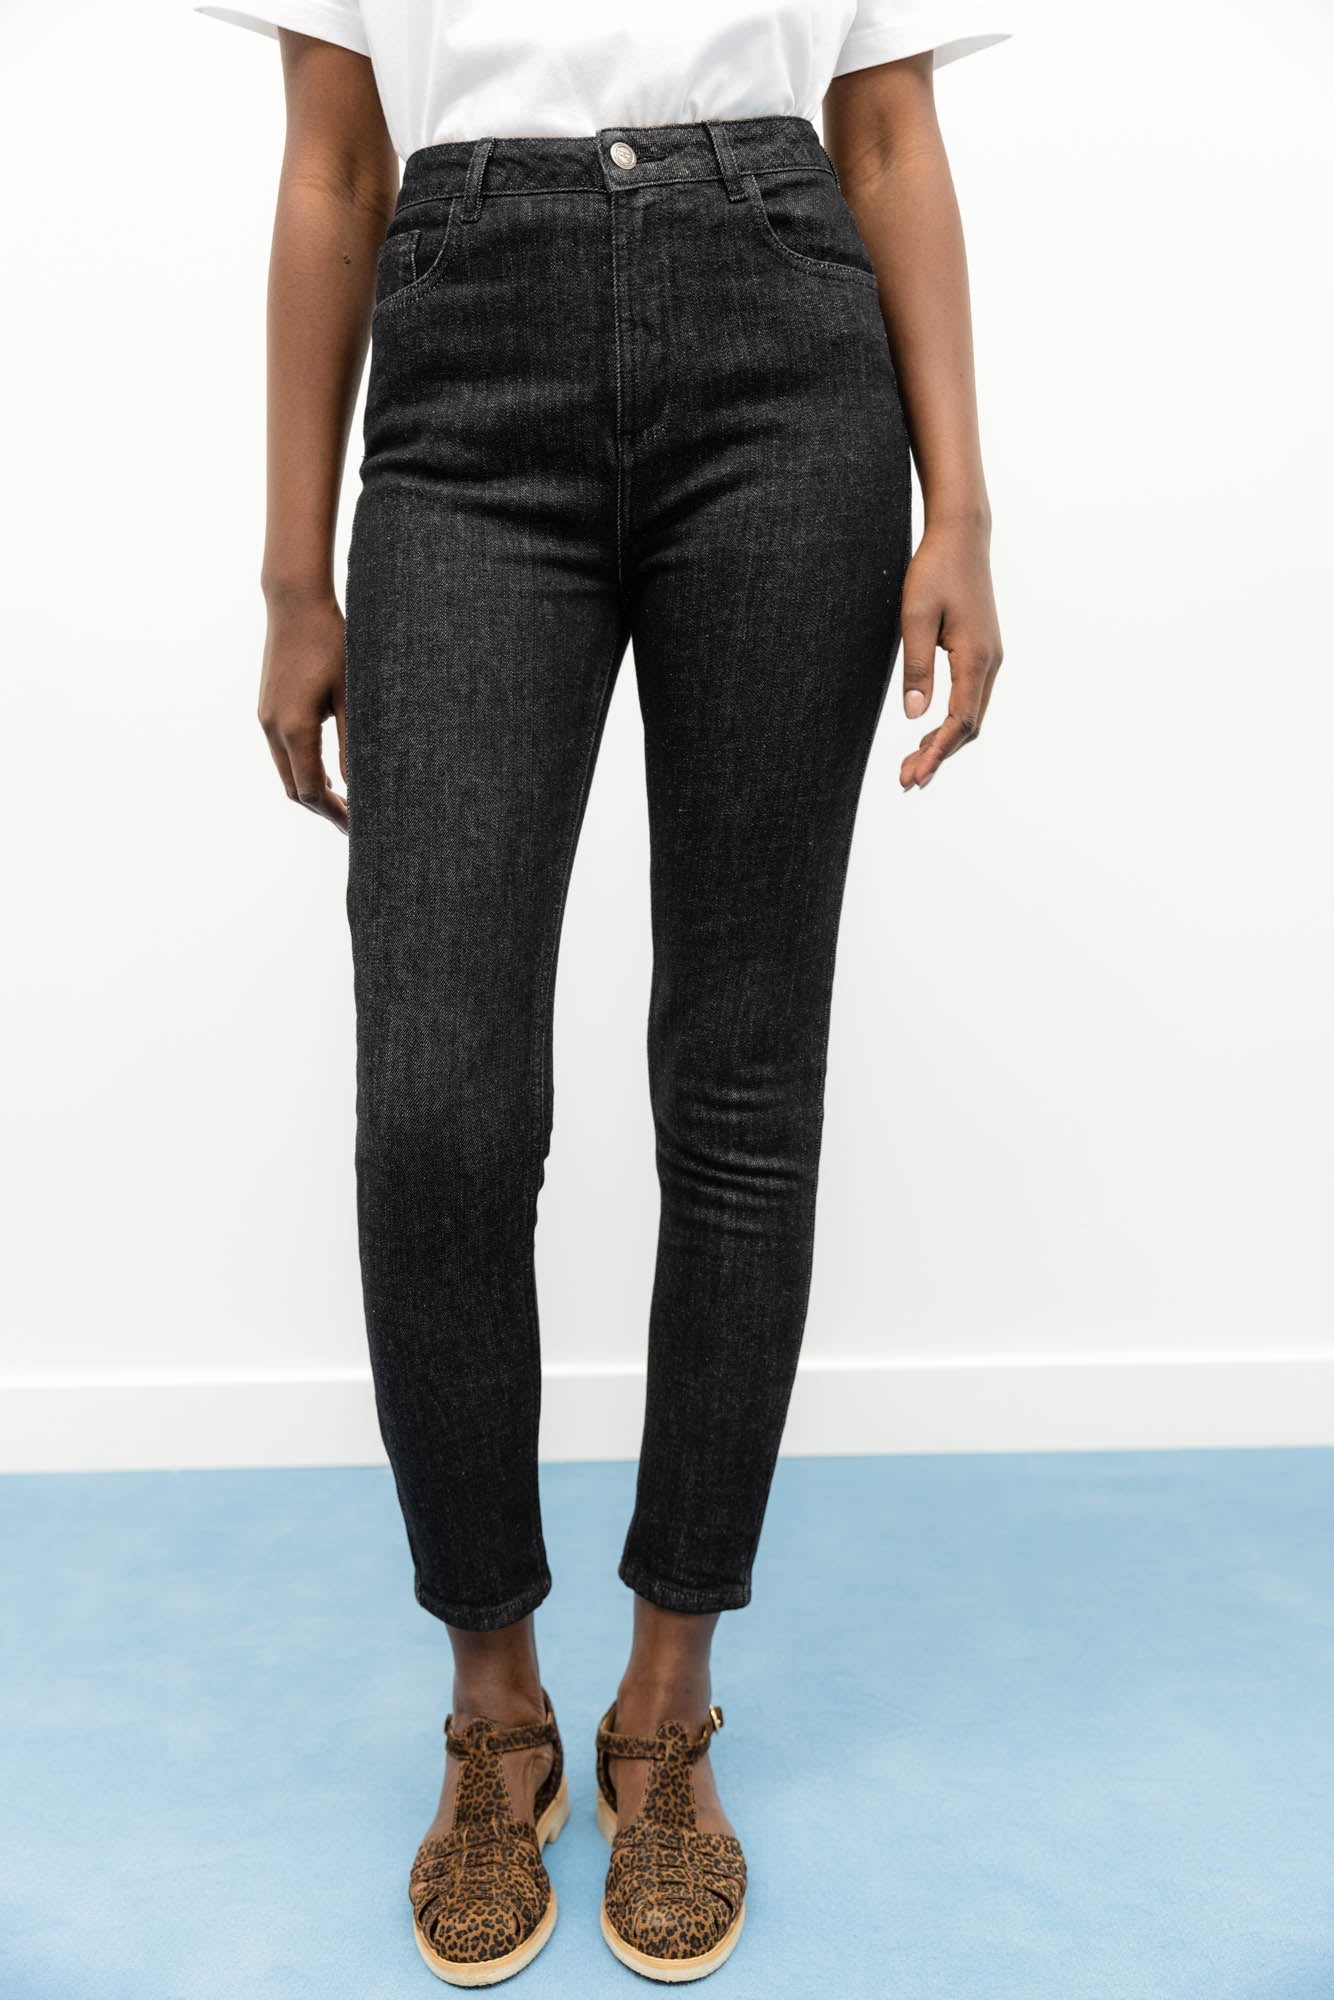 Heather black Ted jeans